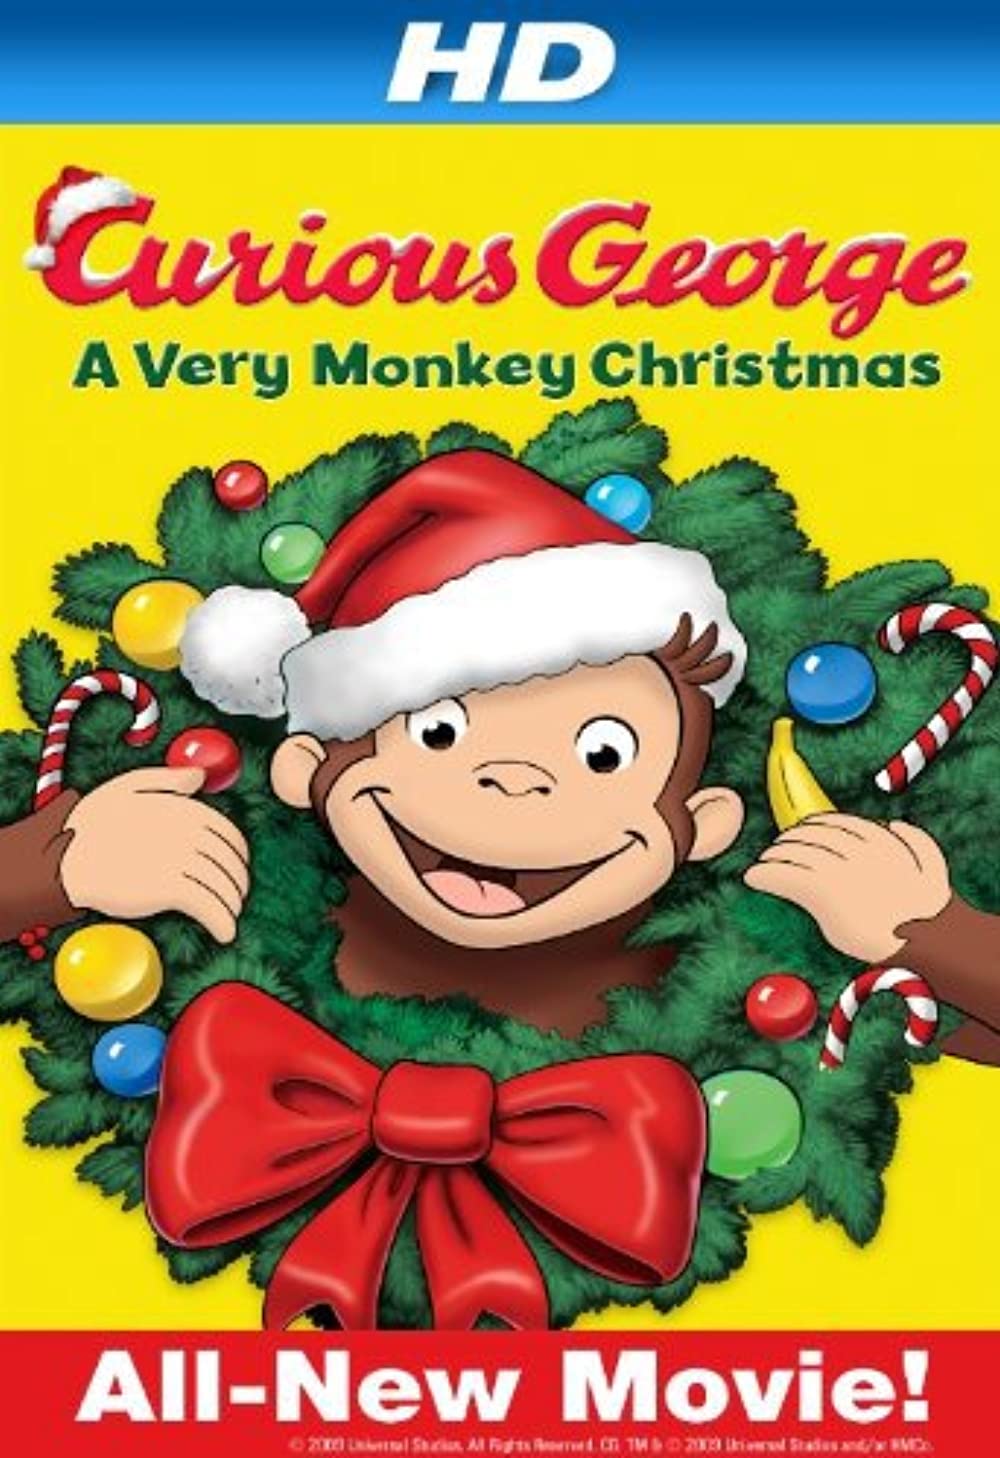 Download Curious George: A Very Monkey Christmas Movie | Download Curious George: A Very Monkey Christmas Online